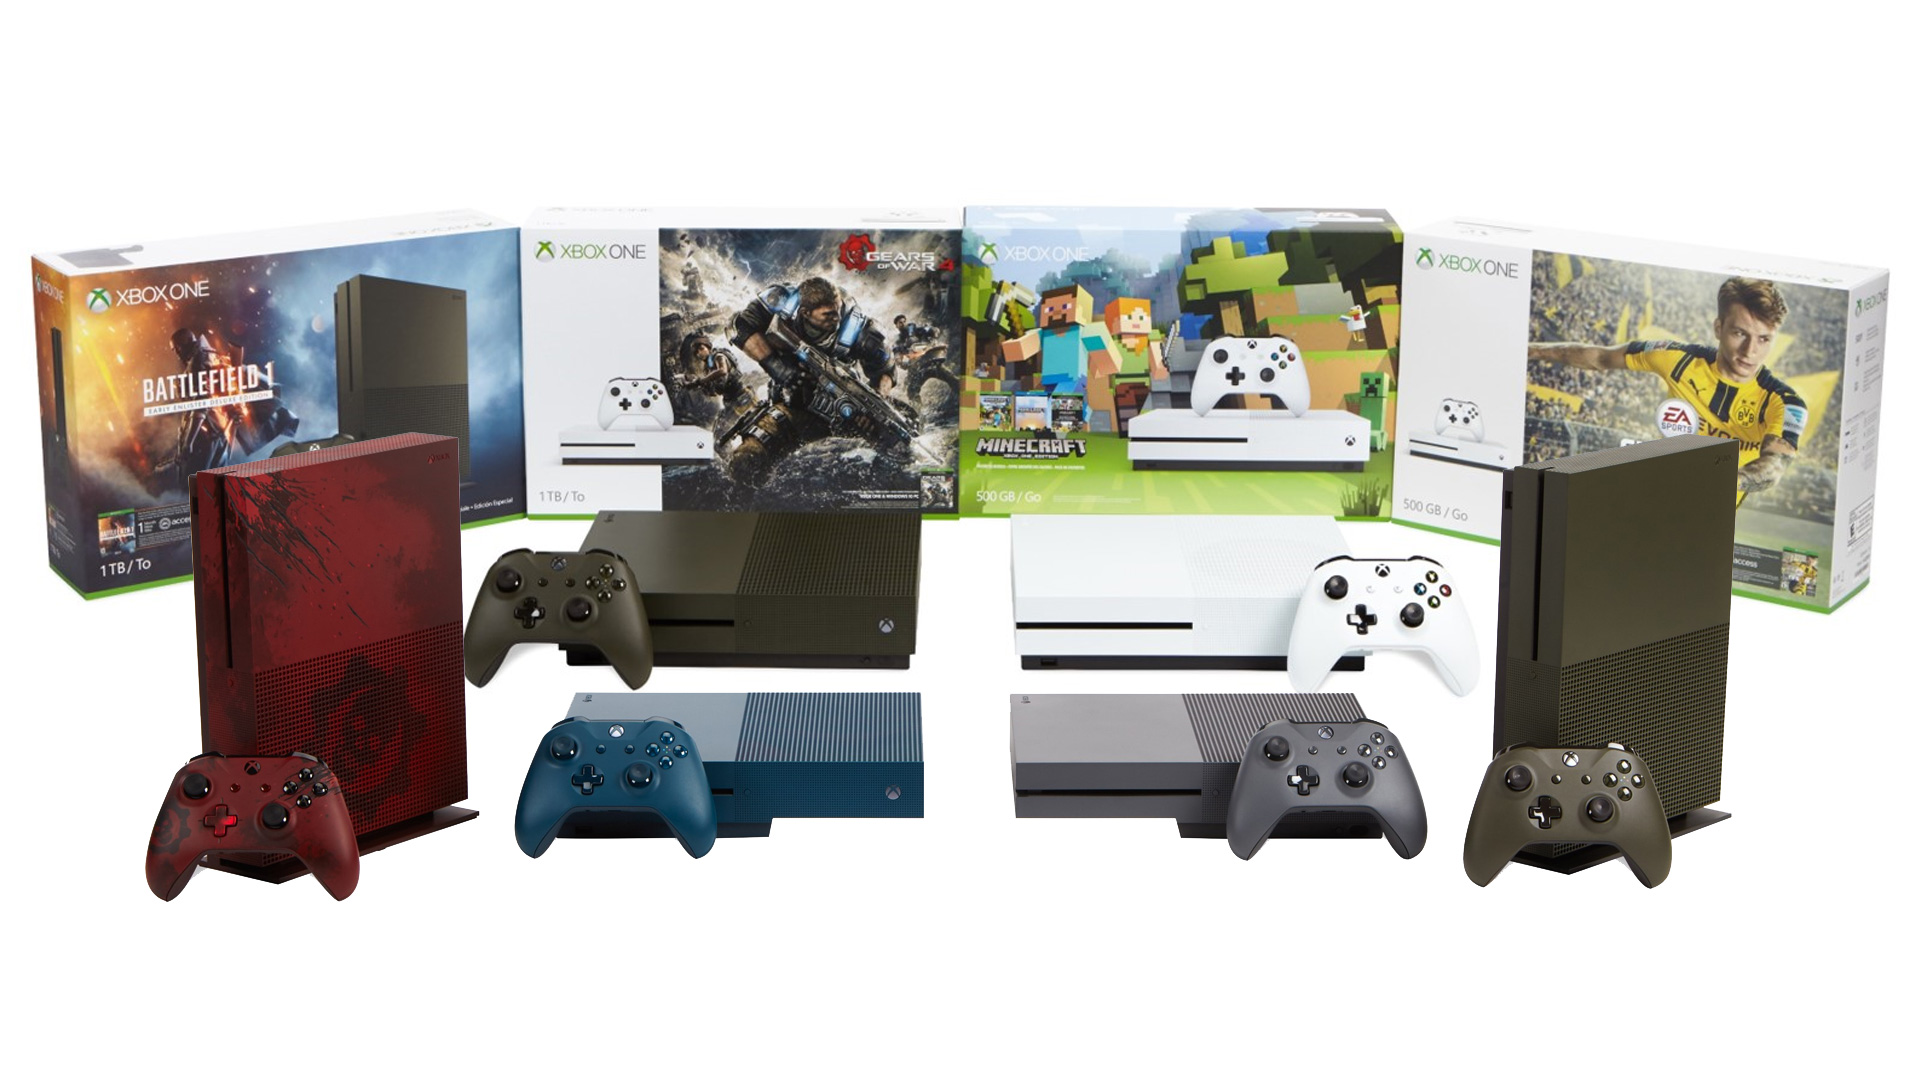 Xbox One Holiday Gift Guide 2016 bundles featuring all the Xbox One S Models Christmas 2016